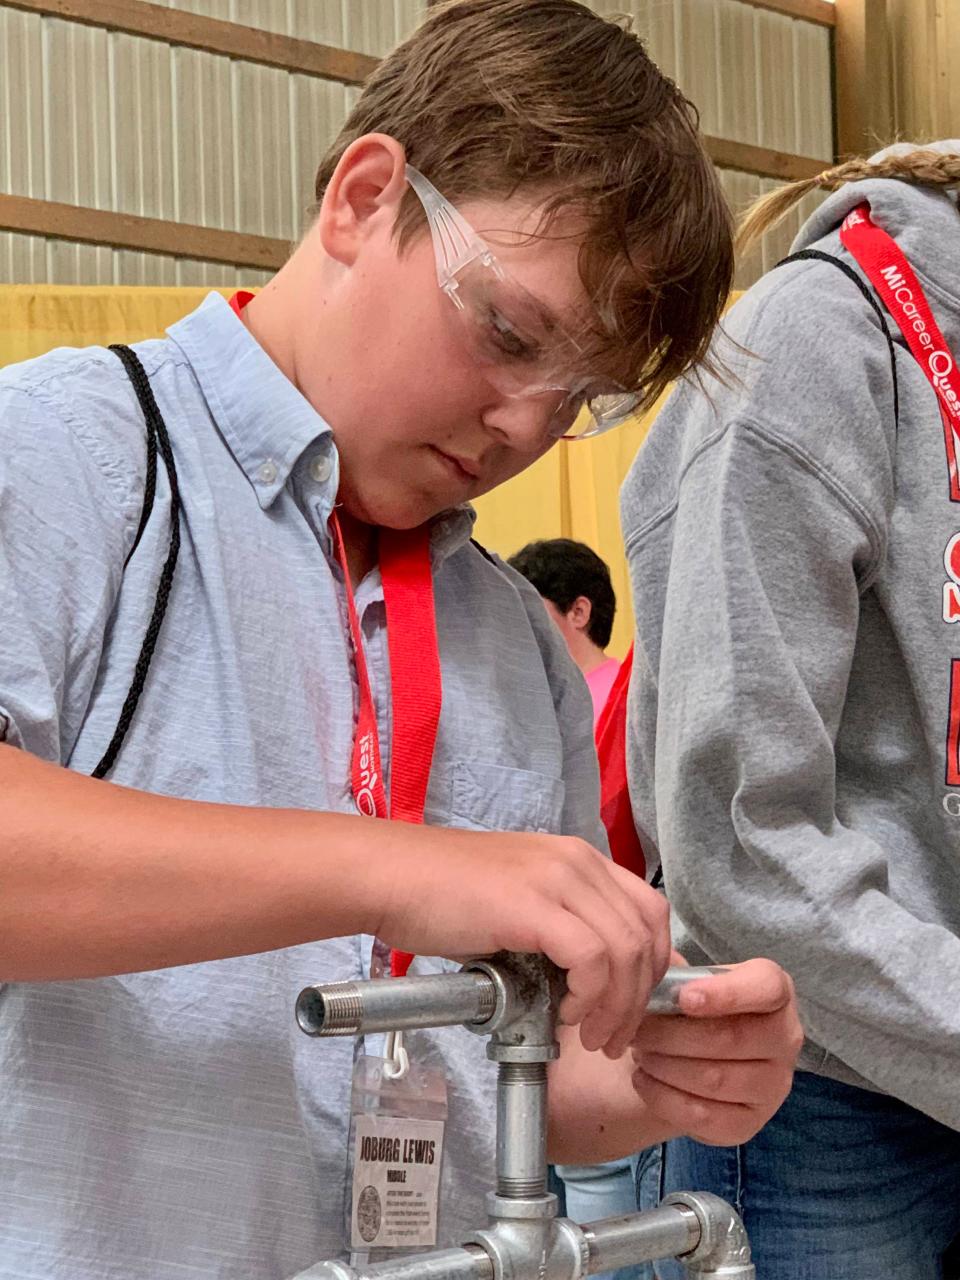 Plumbers are in high demand across the region as there are not as many people going into the skilled trades. The MiCareerQuest event at the Industrial Arts Institute in Onaway introduces local sixth through 12th graders to different in-demand job options available to them.